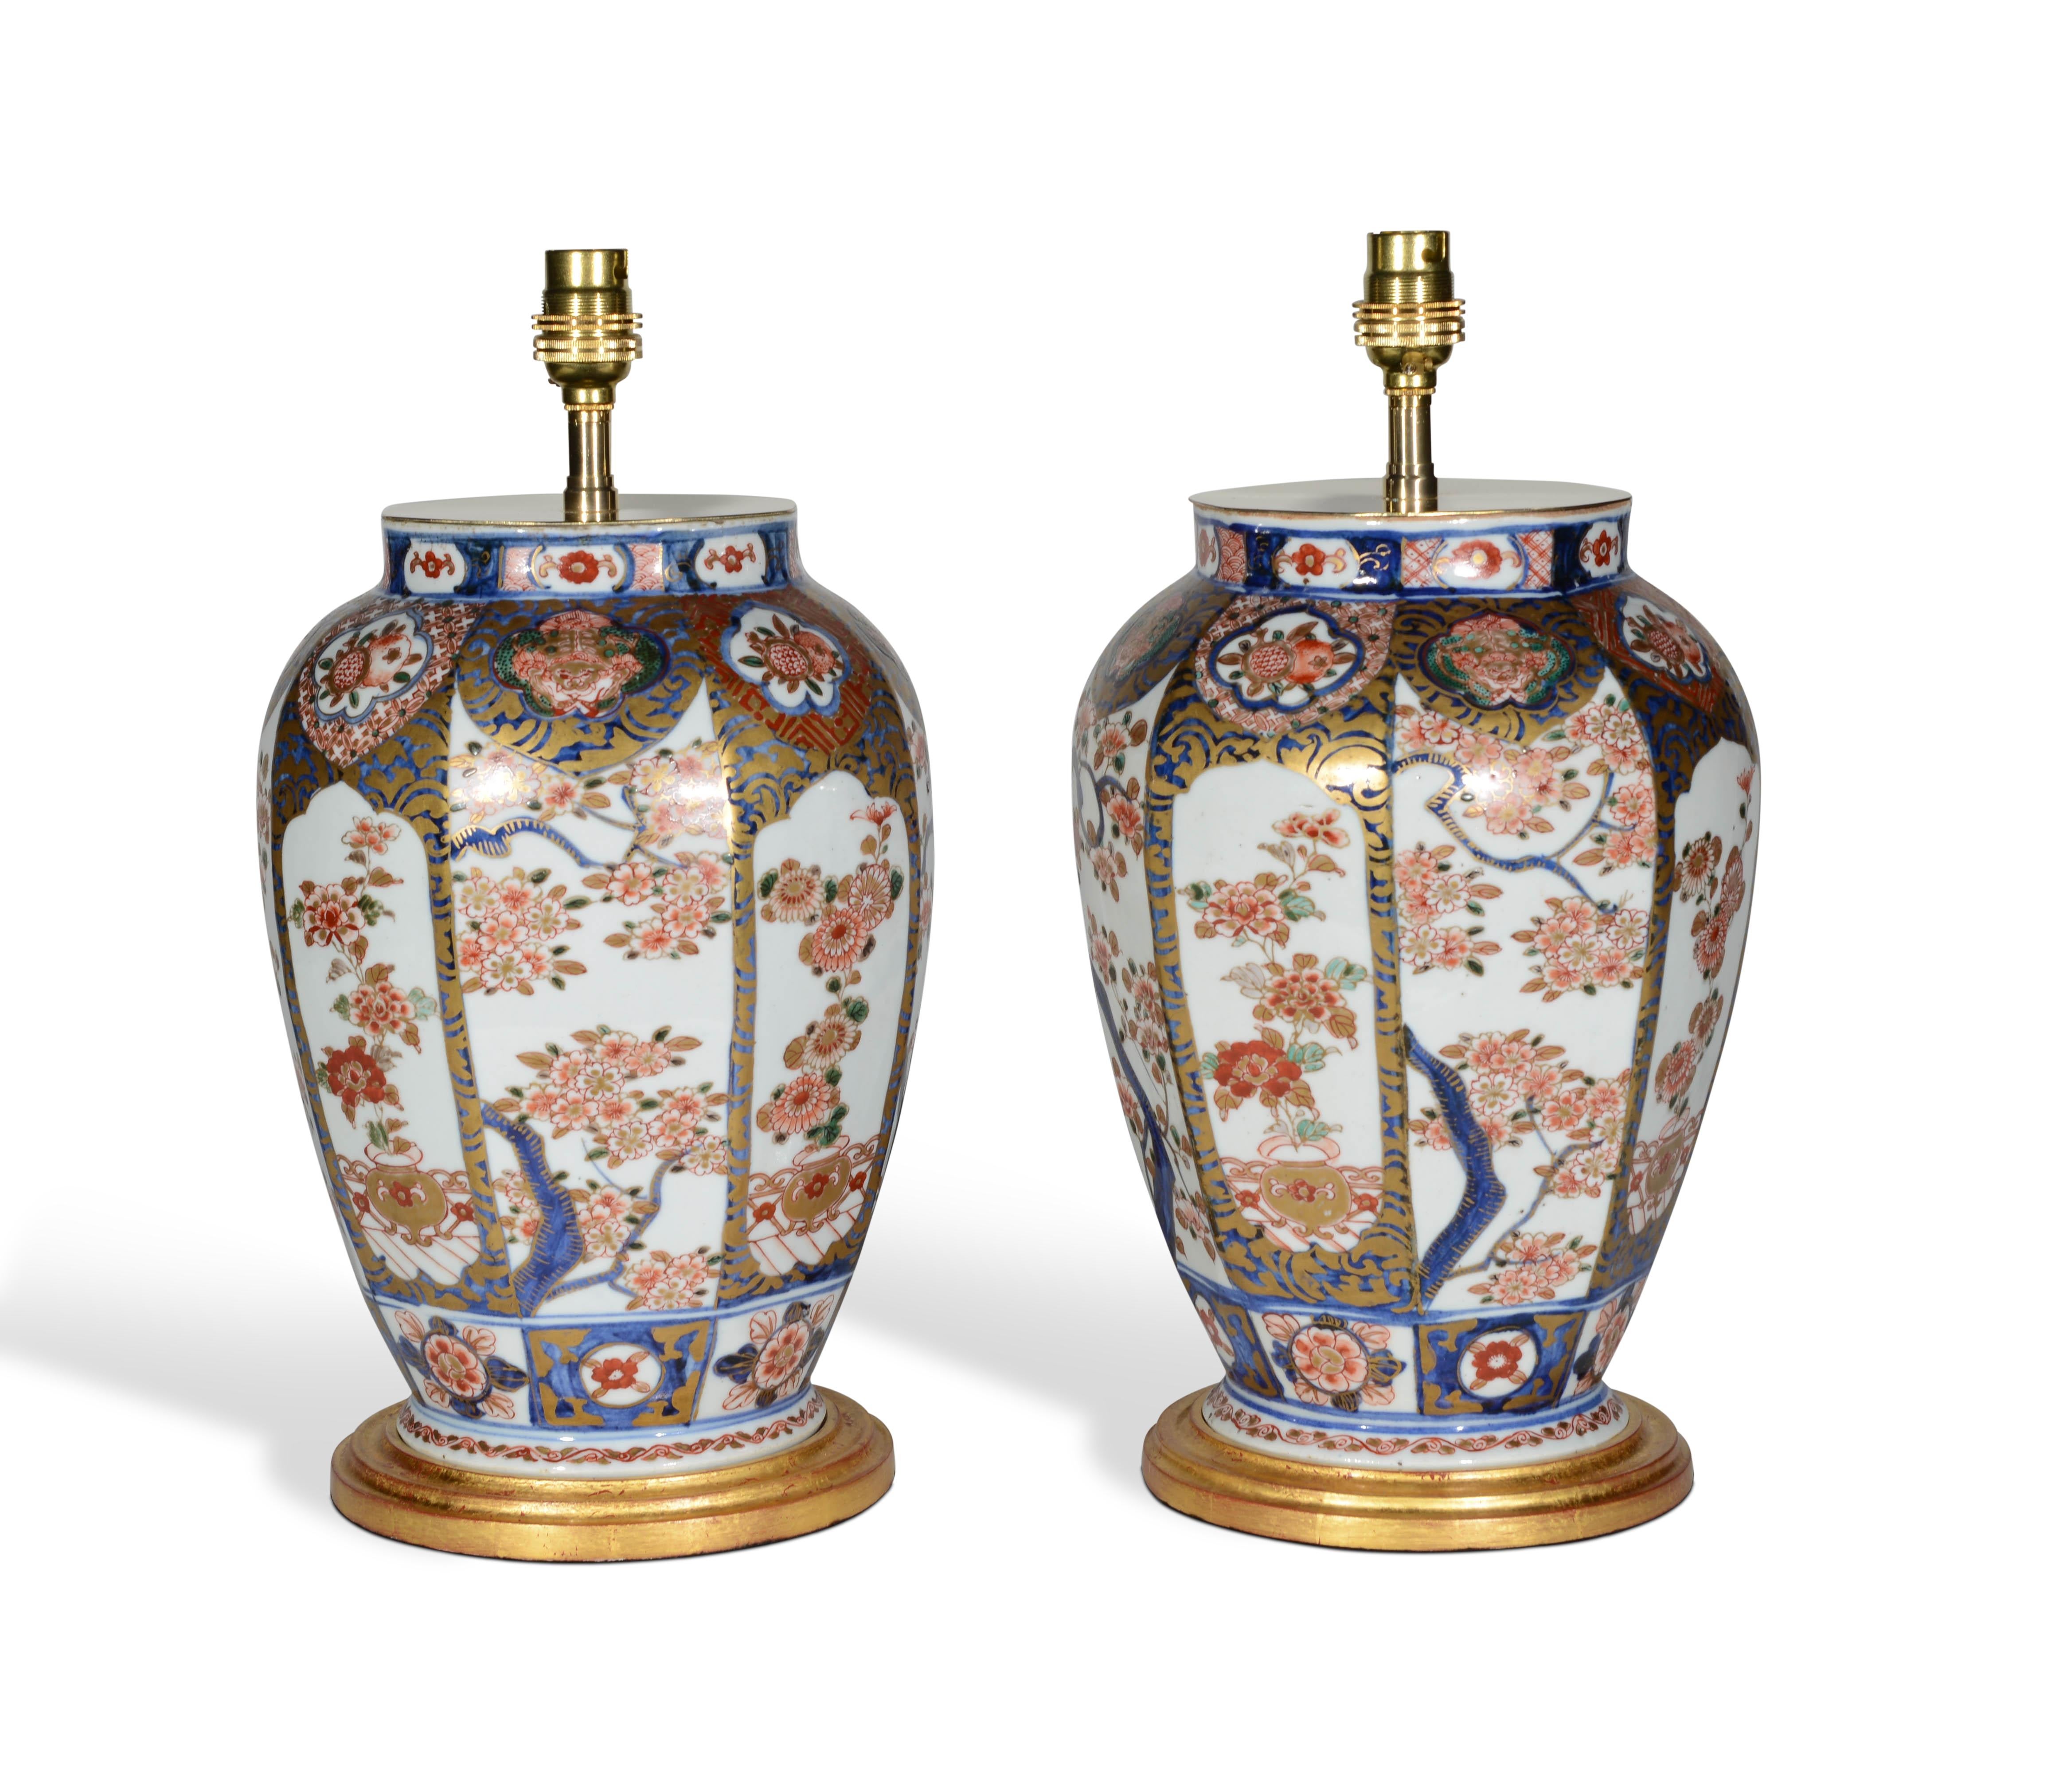 A fine pair of small mid 19th century Japanese vases, decorated throughout in the typical Imari palette of iron red and blues on a predominantly white background with gilded highlights throughout, each panel particularly finely painted with